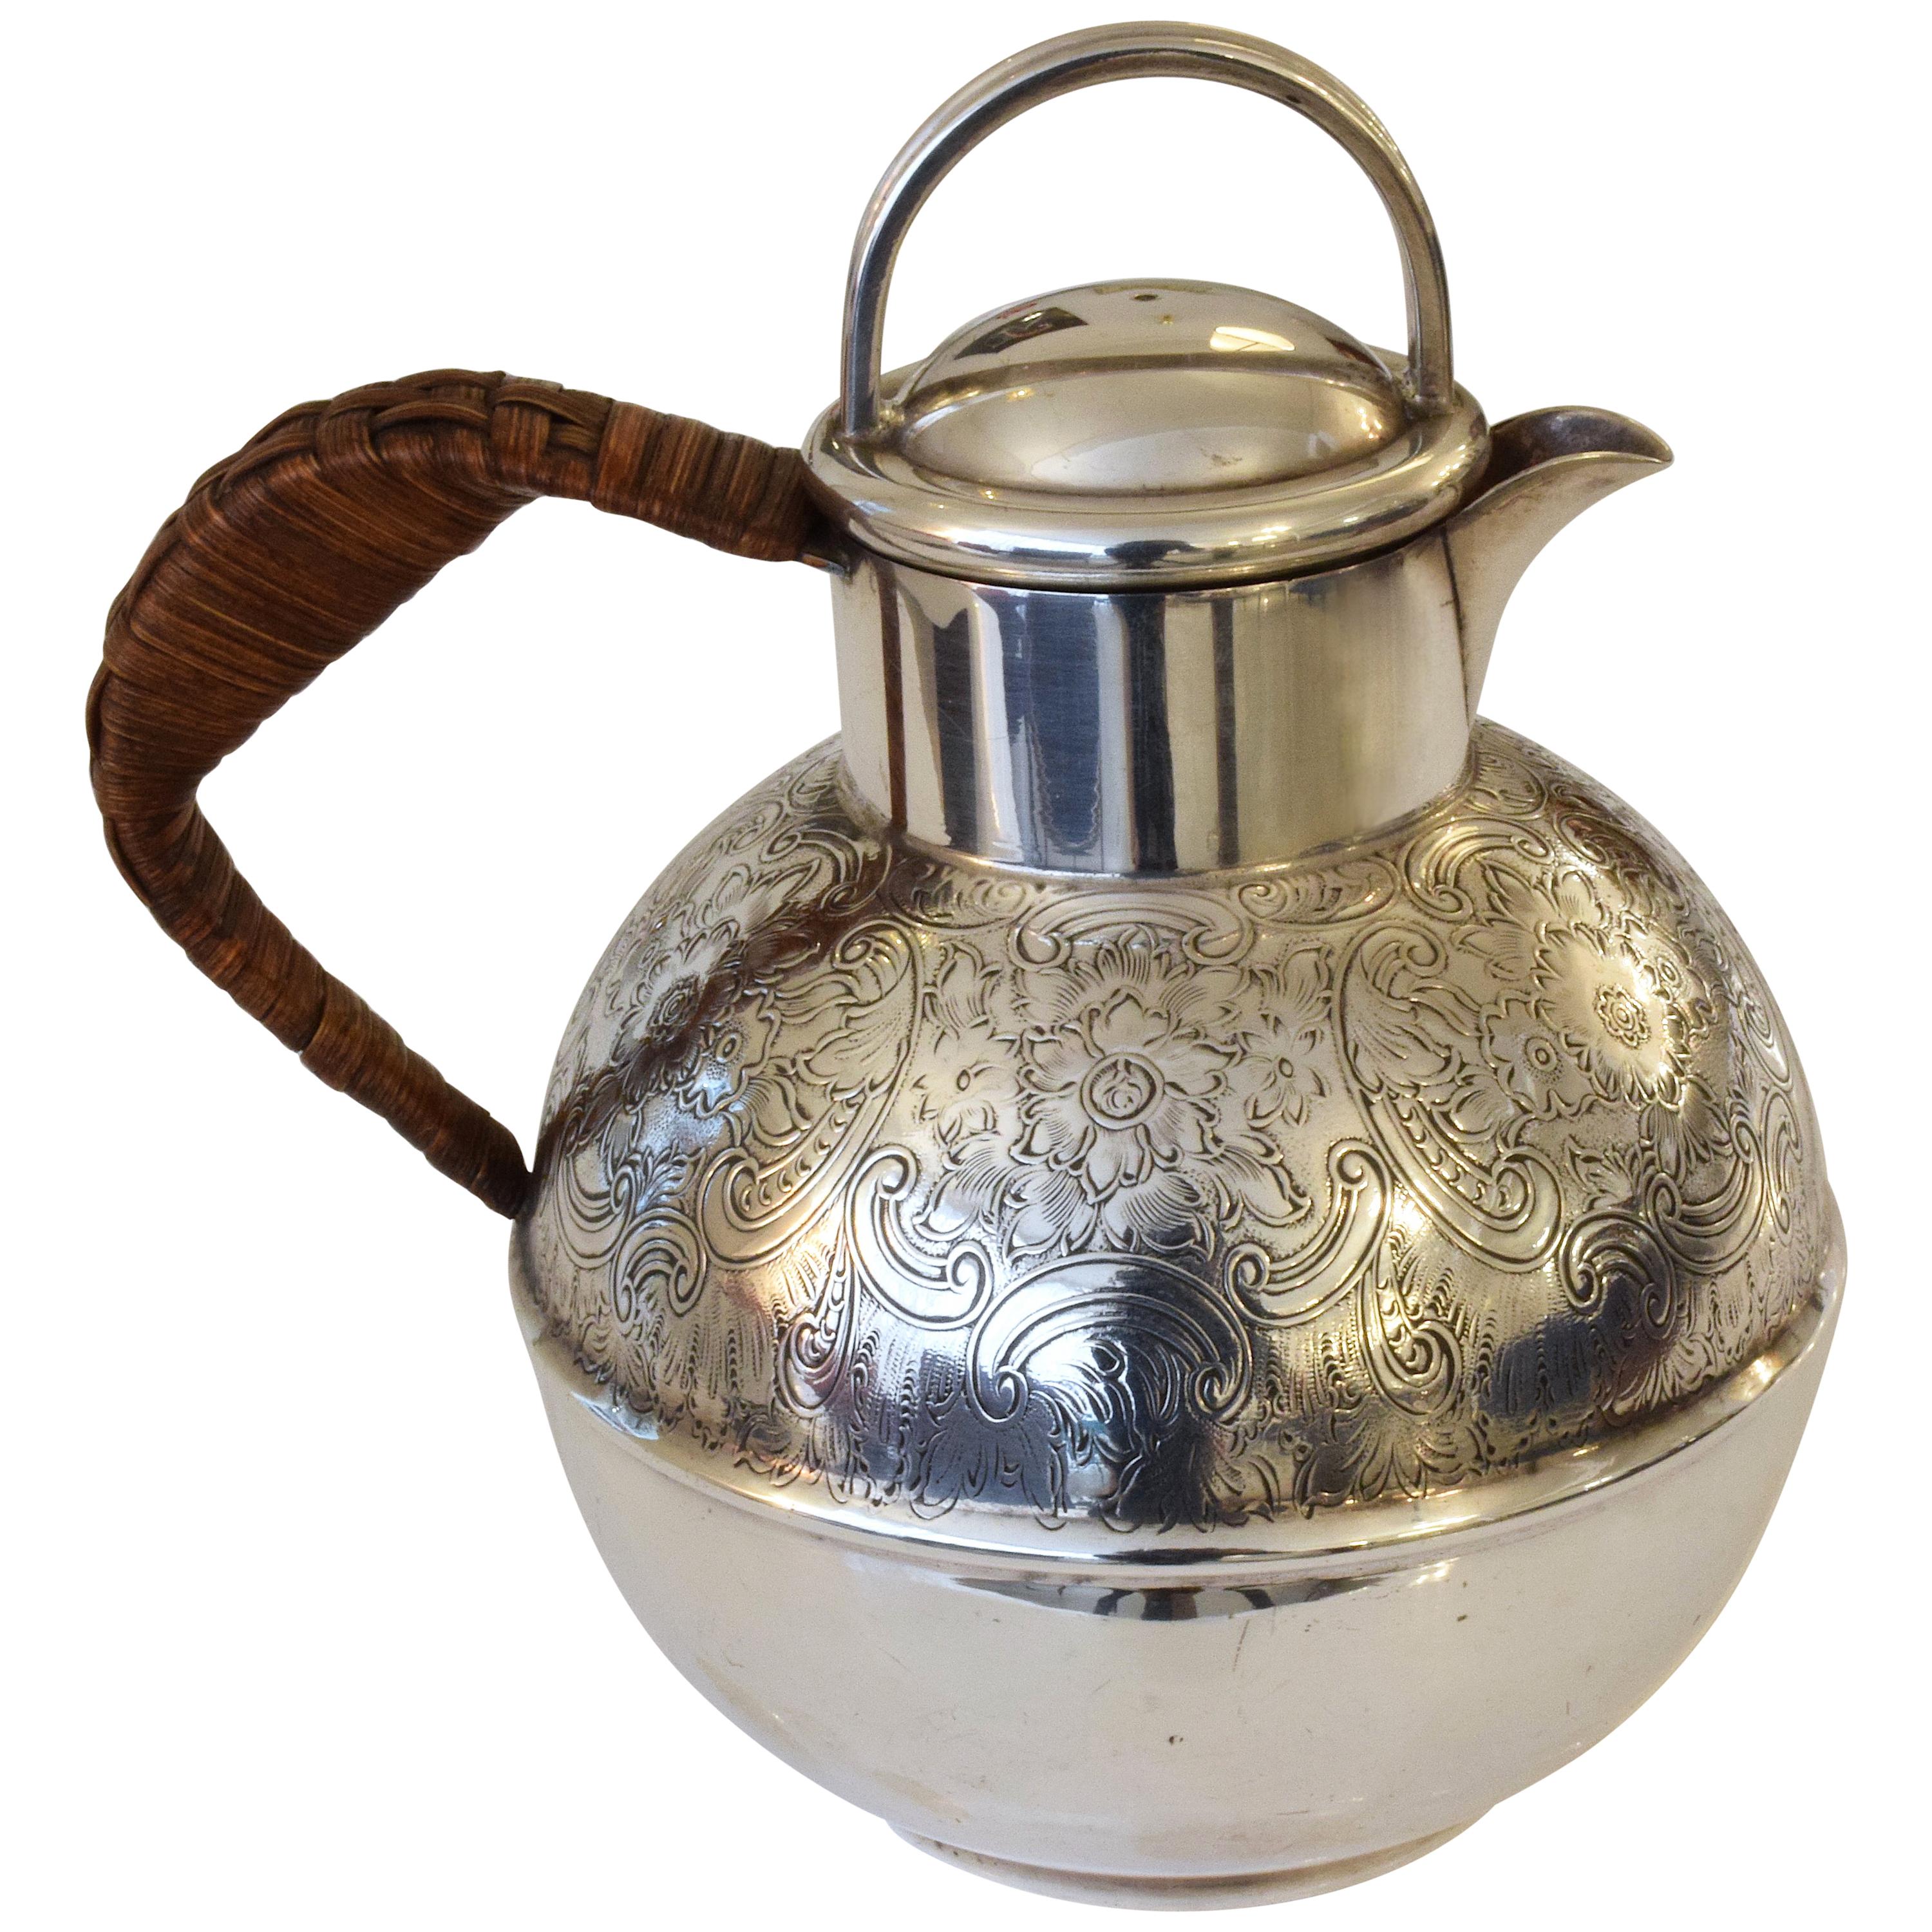 English Antique Small Silver Pitcher or Teapot by Bailey Banks & Biddle